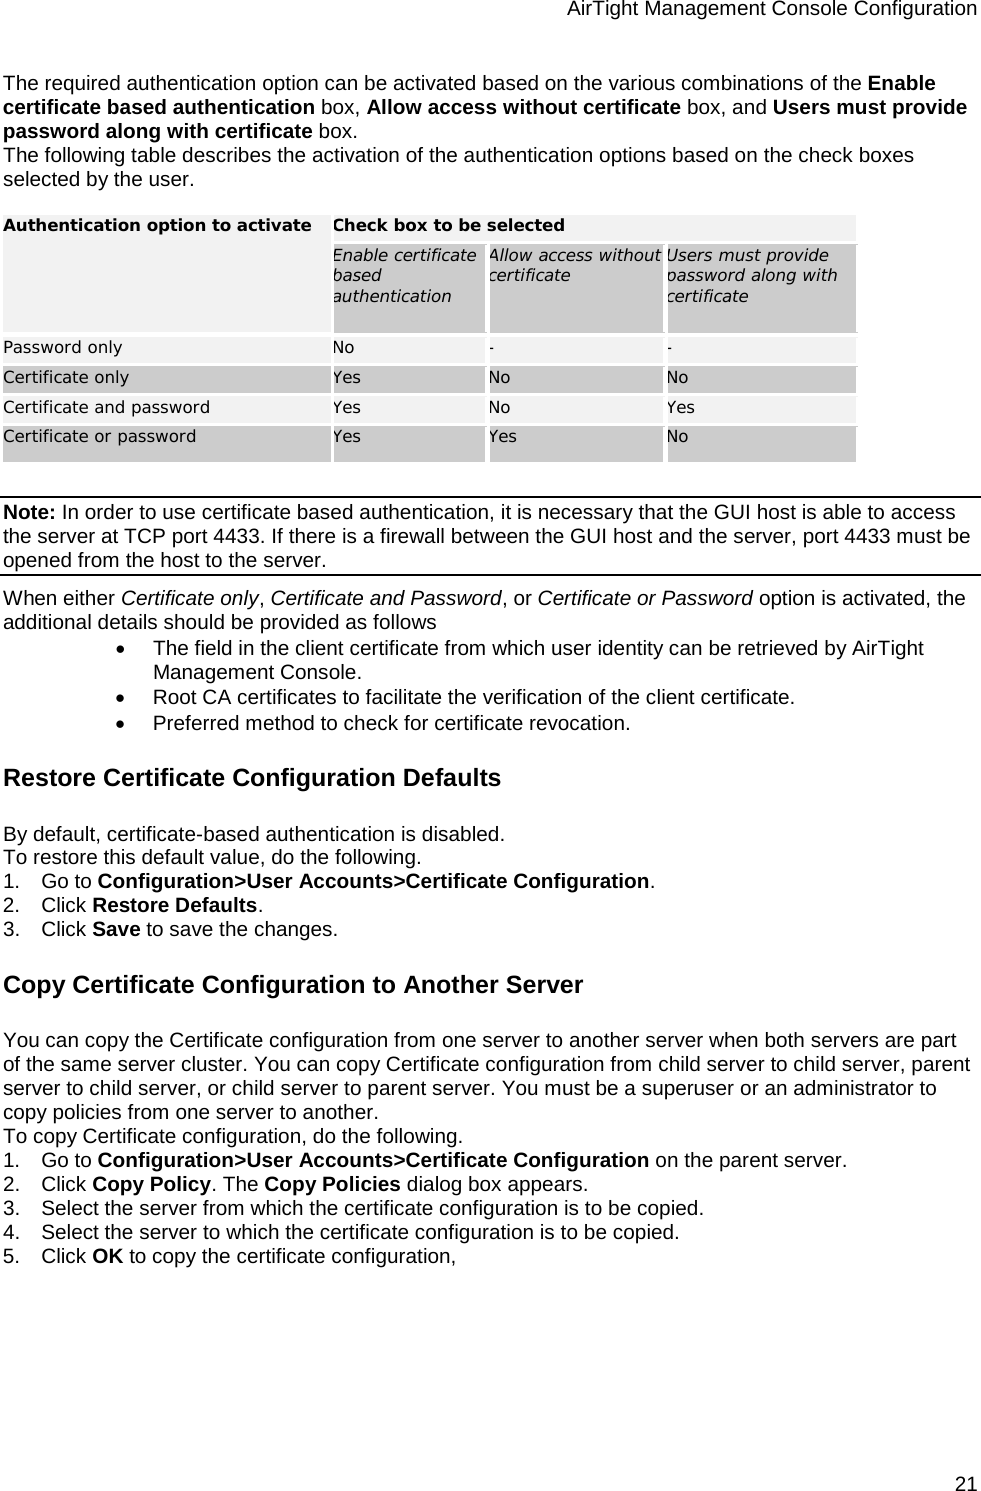 AirTight Management Console Configuration 21 The required authentication option can be activated based on the various combinations of the Enable certificate based authentication box, Allow access without certificate box, and Users must provide password along with certificate box. The following table describes the activation of the authentication options based on the check boxes selected by the user.   Authentication option to activate Check box to be selected Enable certificate based authentication Allow access without certificate Users must provide password along with certificate Password only No - - Certificate only Yes No No Certificate and password Yes No Yes Certificate or password Yes Yes No   Note: In order to use certificate based authentication, it is necessary that the GUI host is able to access the server at TCP port 4433. If there is a firewall between the GUI host and the server, port 4433 must be opened from the host to the server. When either Certificate only, Certificate and Password, or Certificate or Password option is activated, the additional details should be provided as follows • The field in the client certificate from which user identity can be retrieved by AirTight Management Console. • Root CA certificates to facilitate the verification of the client certificate. • Preferred method to check for certificate revocation. Restore Certificate Configuration Defaults By default, certificate-based authentication is disabled.  To restore this default value, do the following. 1.      Go to Configuration&gt;User Accounts&gt;Certificate Configuration. 2.      Click Restore Defaults. 3.      Click Save to save the changes. Copy Certificate Configuration to Another Server You can copy the Certificate configuration from one server to another server when both servers are part of the same server cluster. You can copy Certificate configuration from child server to child server, parent server to child server, or child server to parent server. You must be a superuser or an administrator to copy policies from one server to another. To copy Certificate configuration, do the following. 1.      Go to Configuration&gt;User Accounts&gt;Certificate Configuration on the parent server. 2.      Click Copy Policy. The Copy Policies dialog box appears. 3.      Select the server from which the certificate configuration is to be copied. 4.      Select the server to which the certificate configuration is to be copied. 5.      Click OK to copy the certificate configuration,   